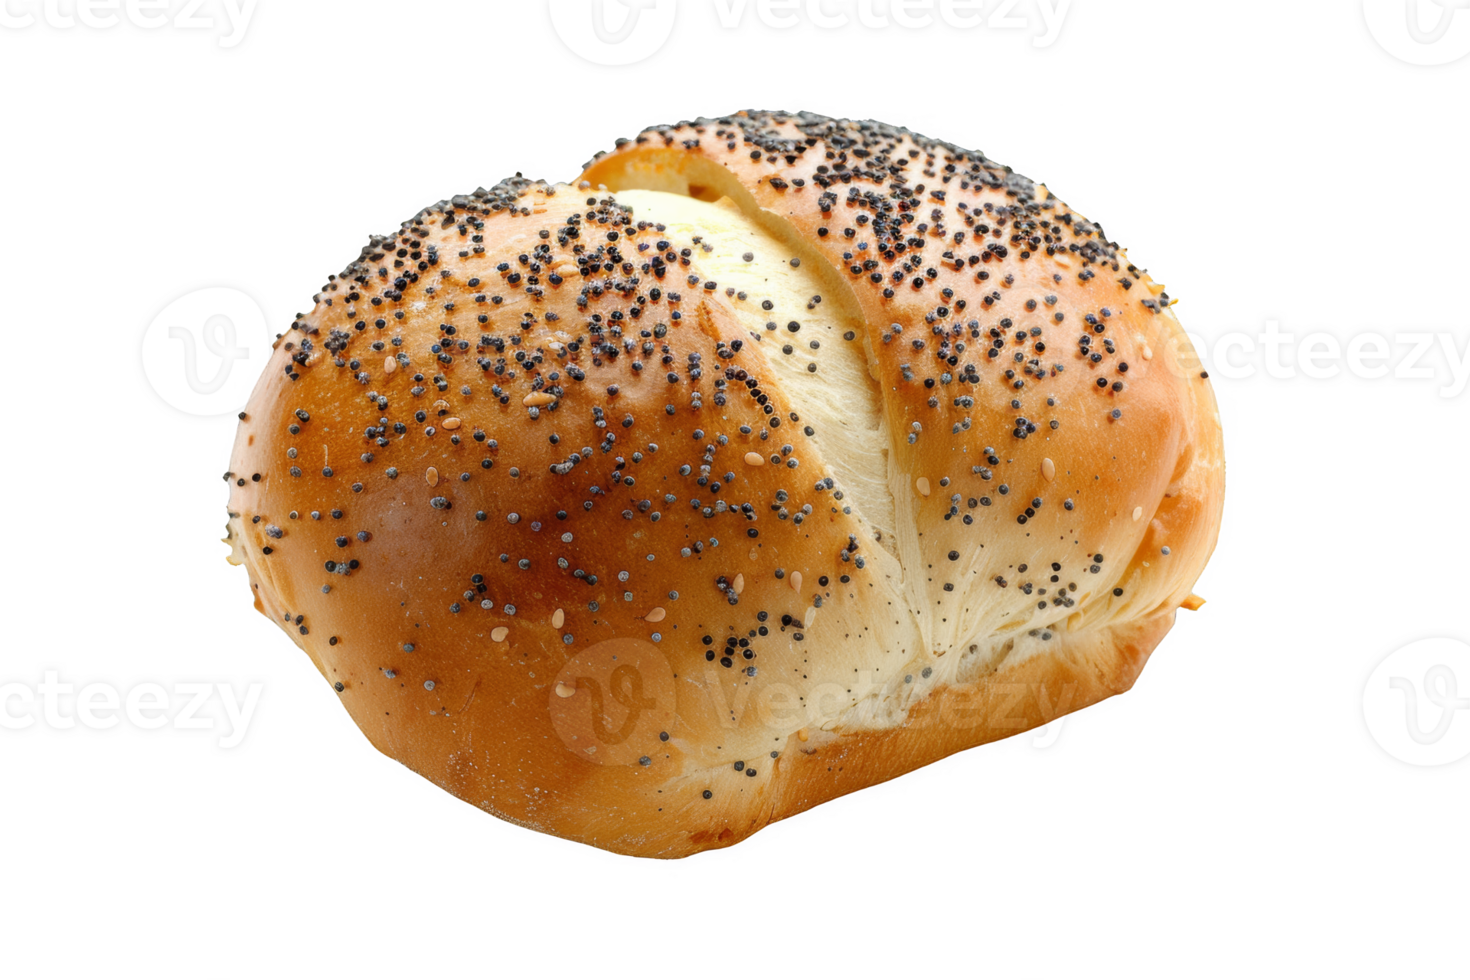 Close Up of Bagel png